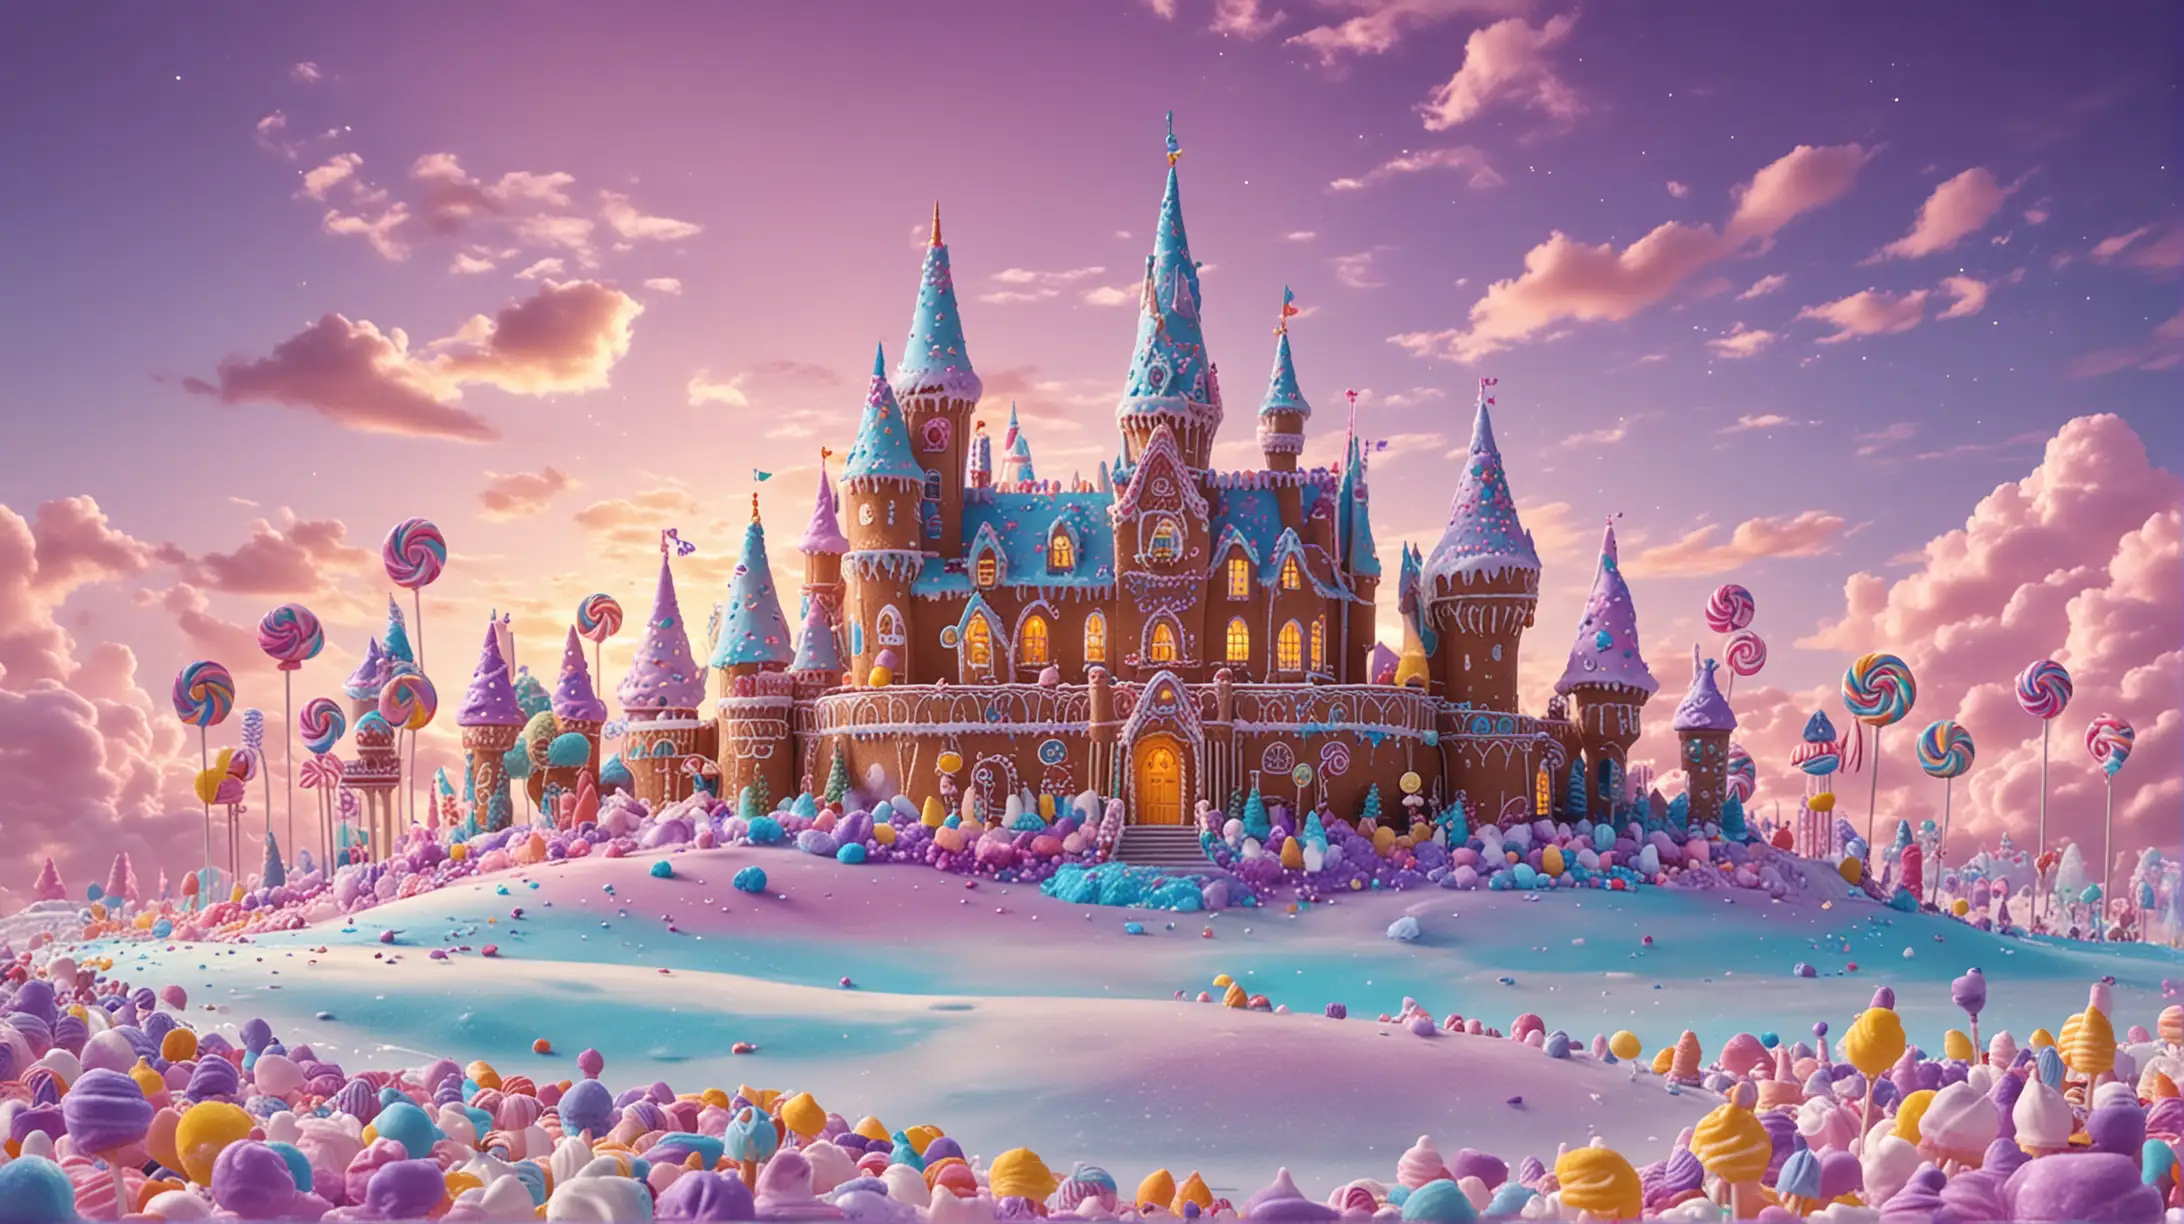 Whimsical Candy Castle and Gingerbread Town with Magical Sugary Landscape